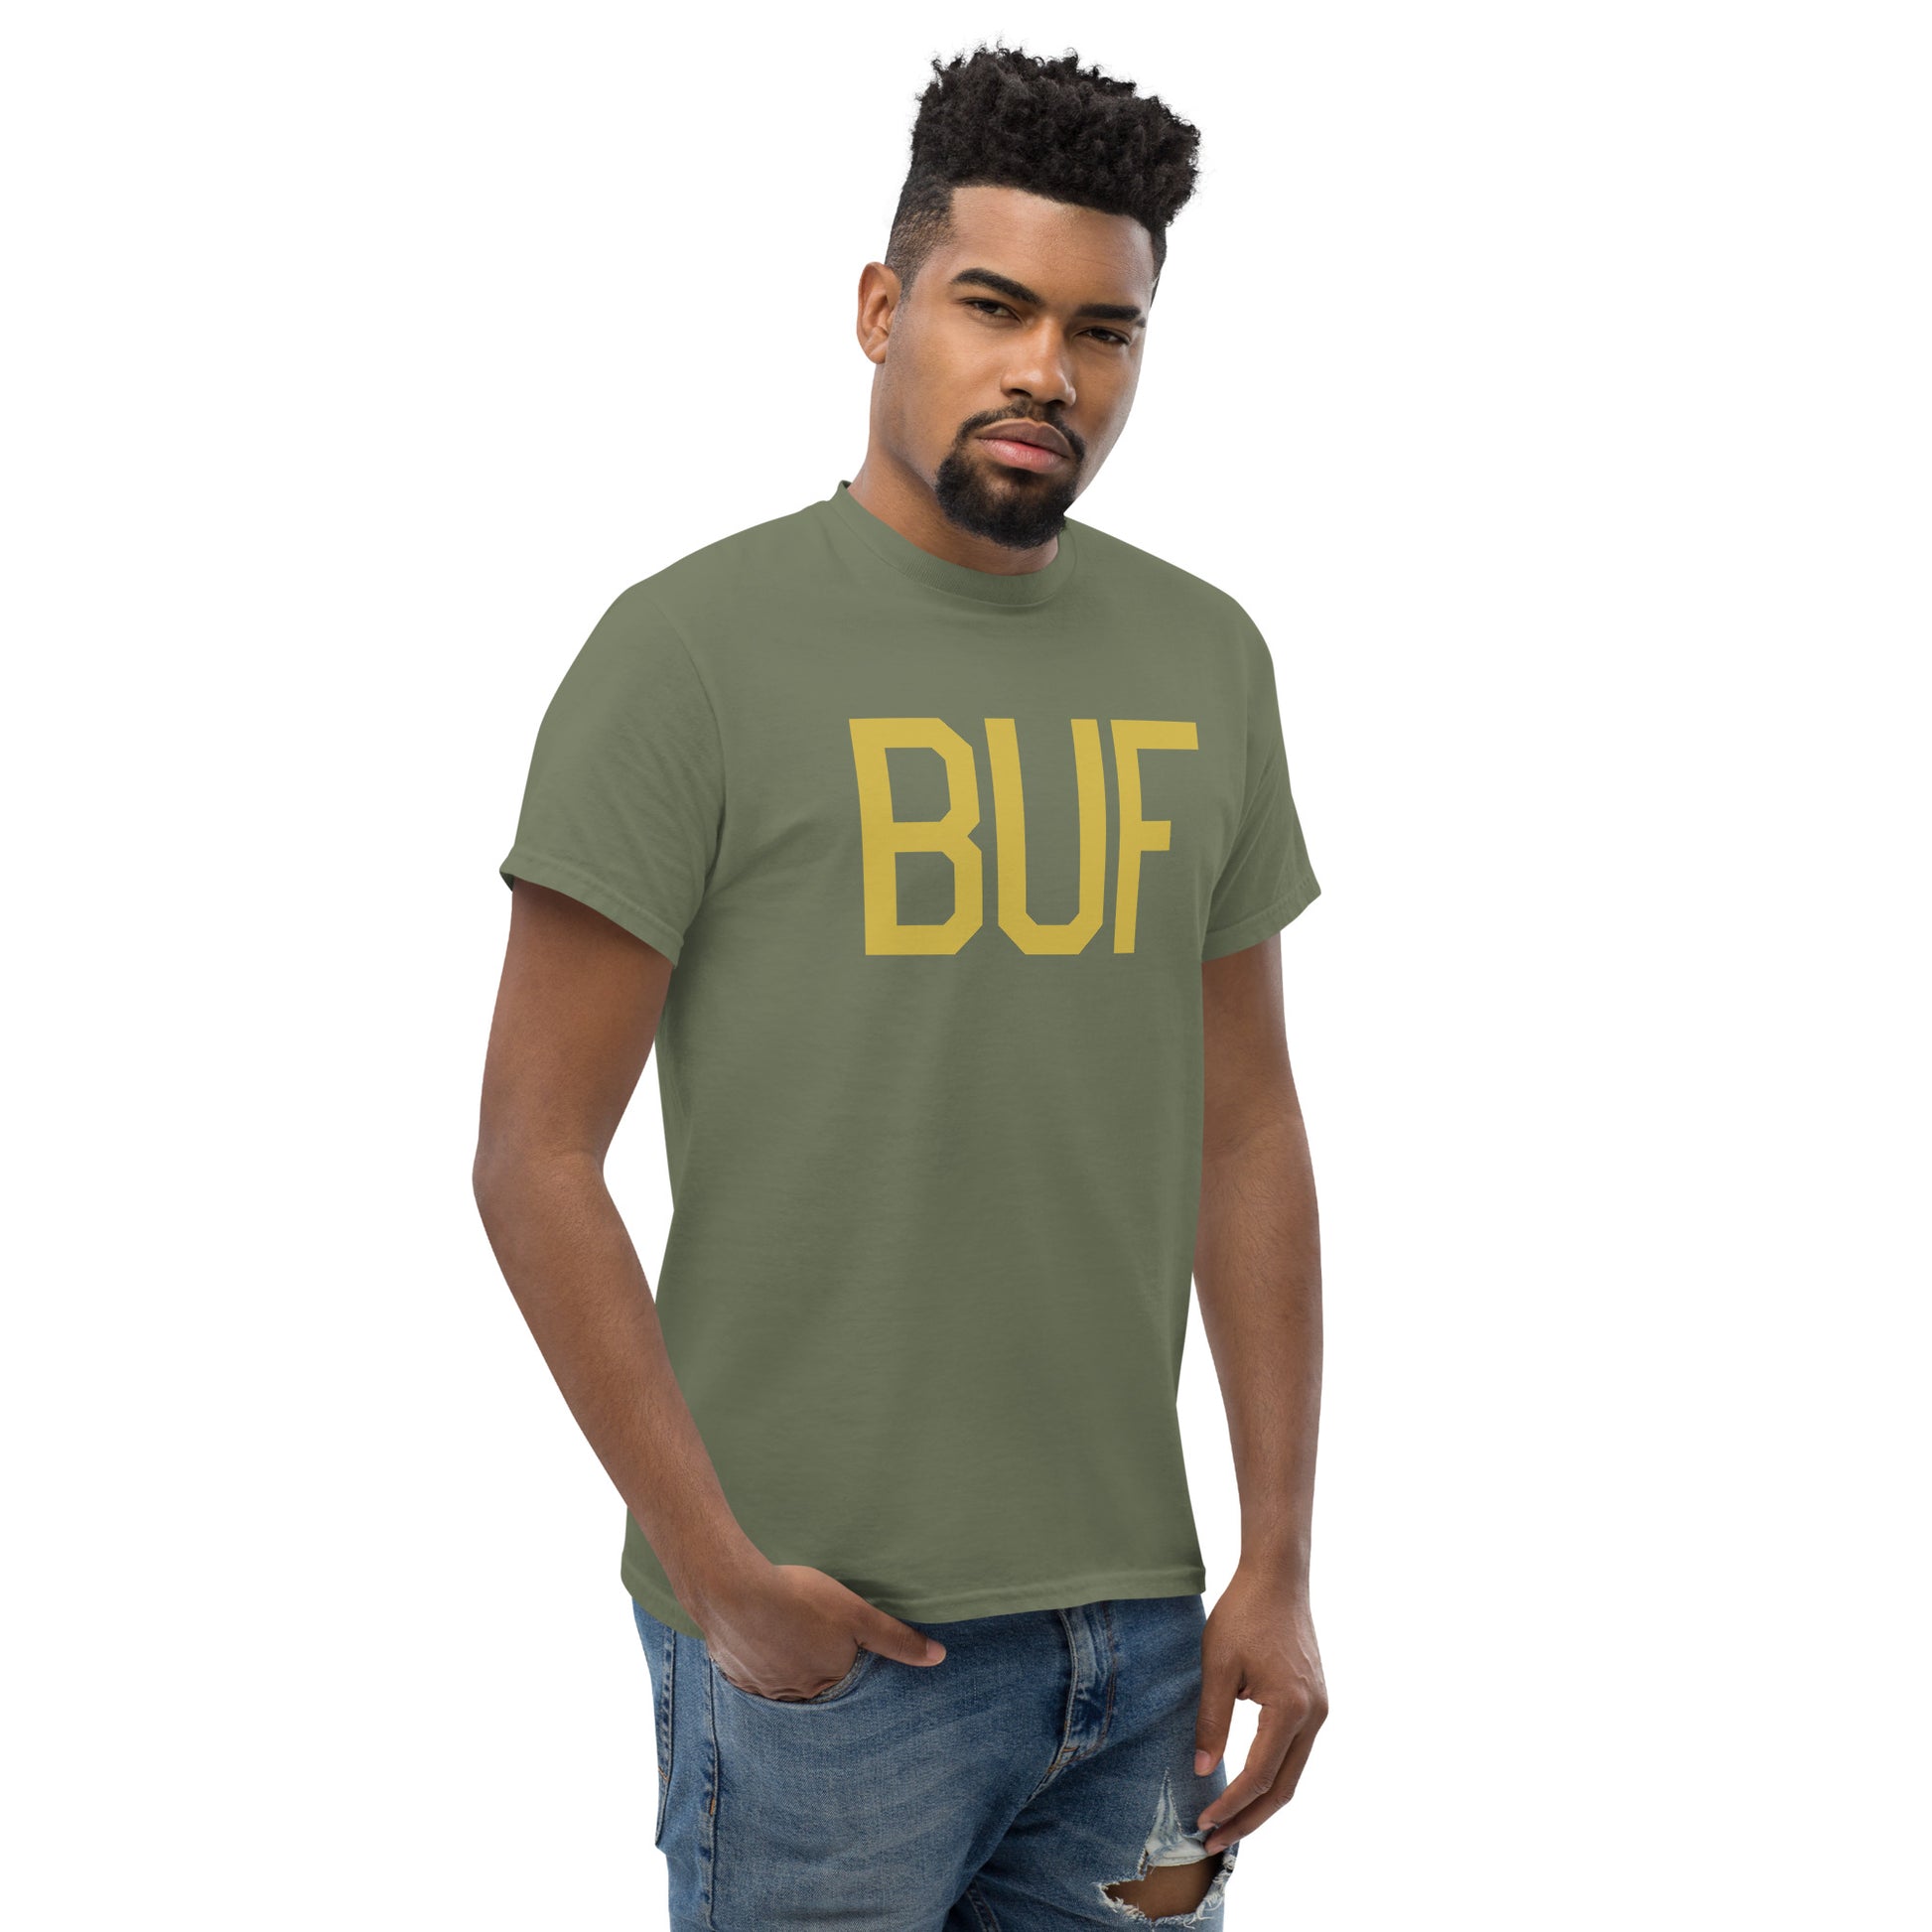 Aviation Enthusiast Men's Tee - Old Gold Graphic • BUF Buffalo • YHM Designs - Image 08